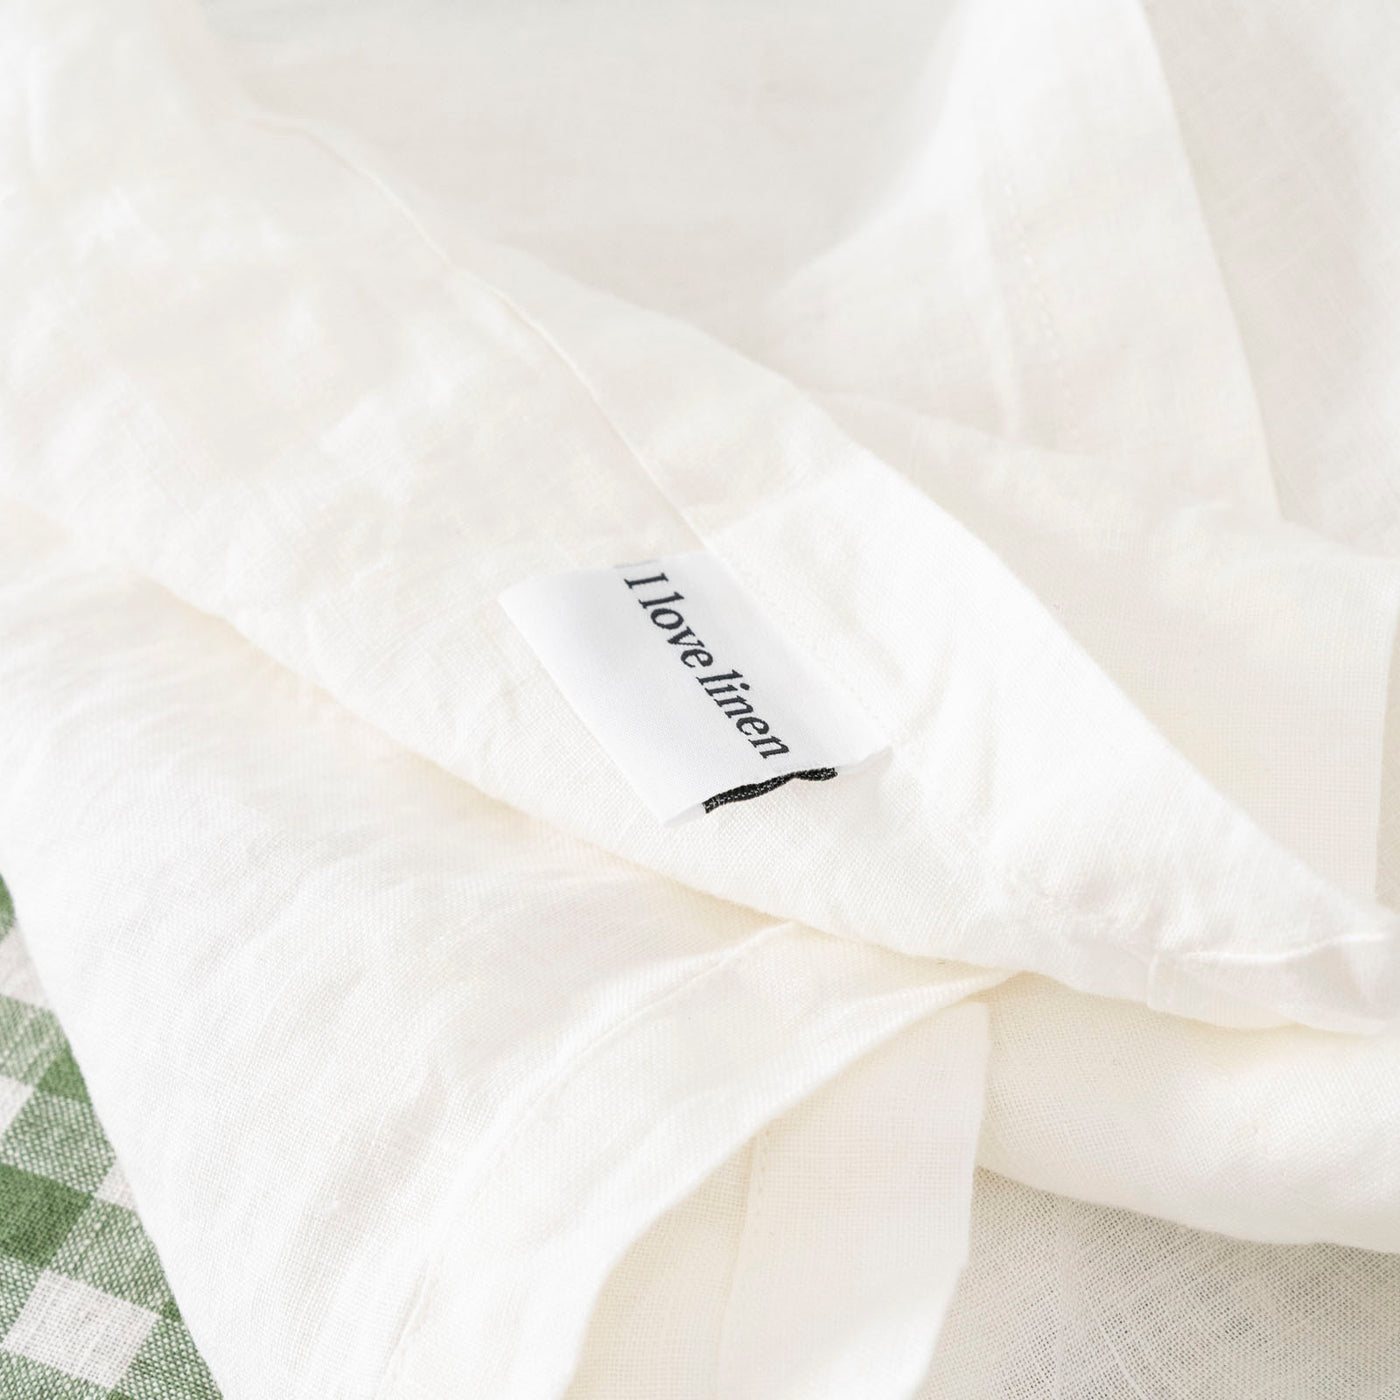 French Flax Linen Napkins (Set Of 4) in Milk